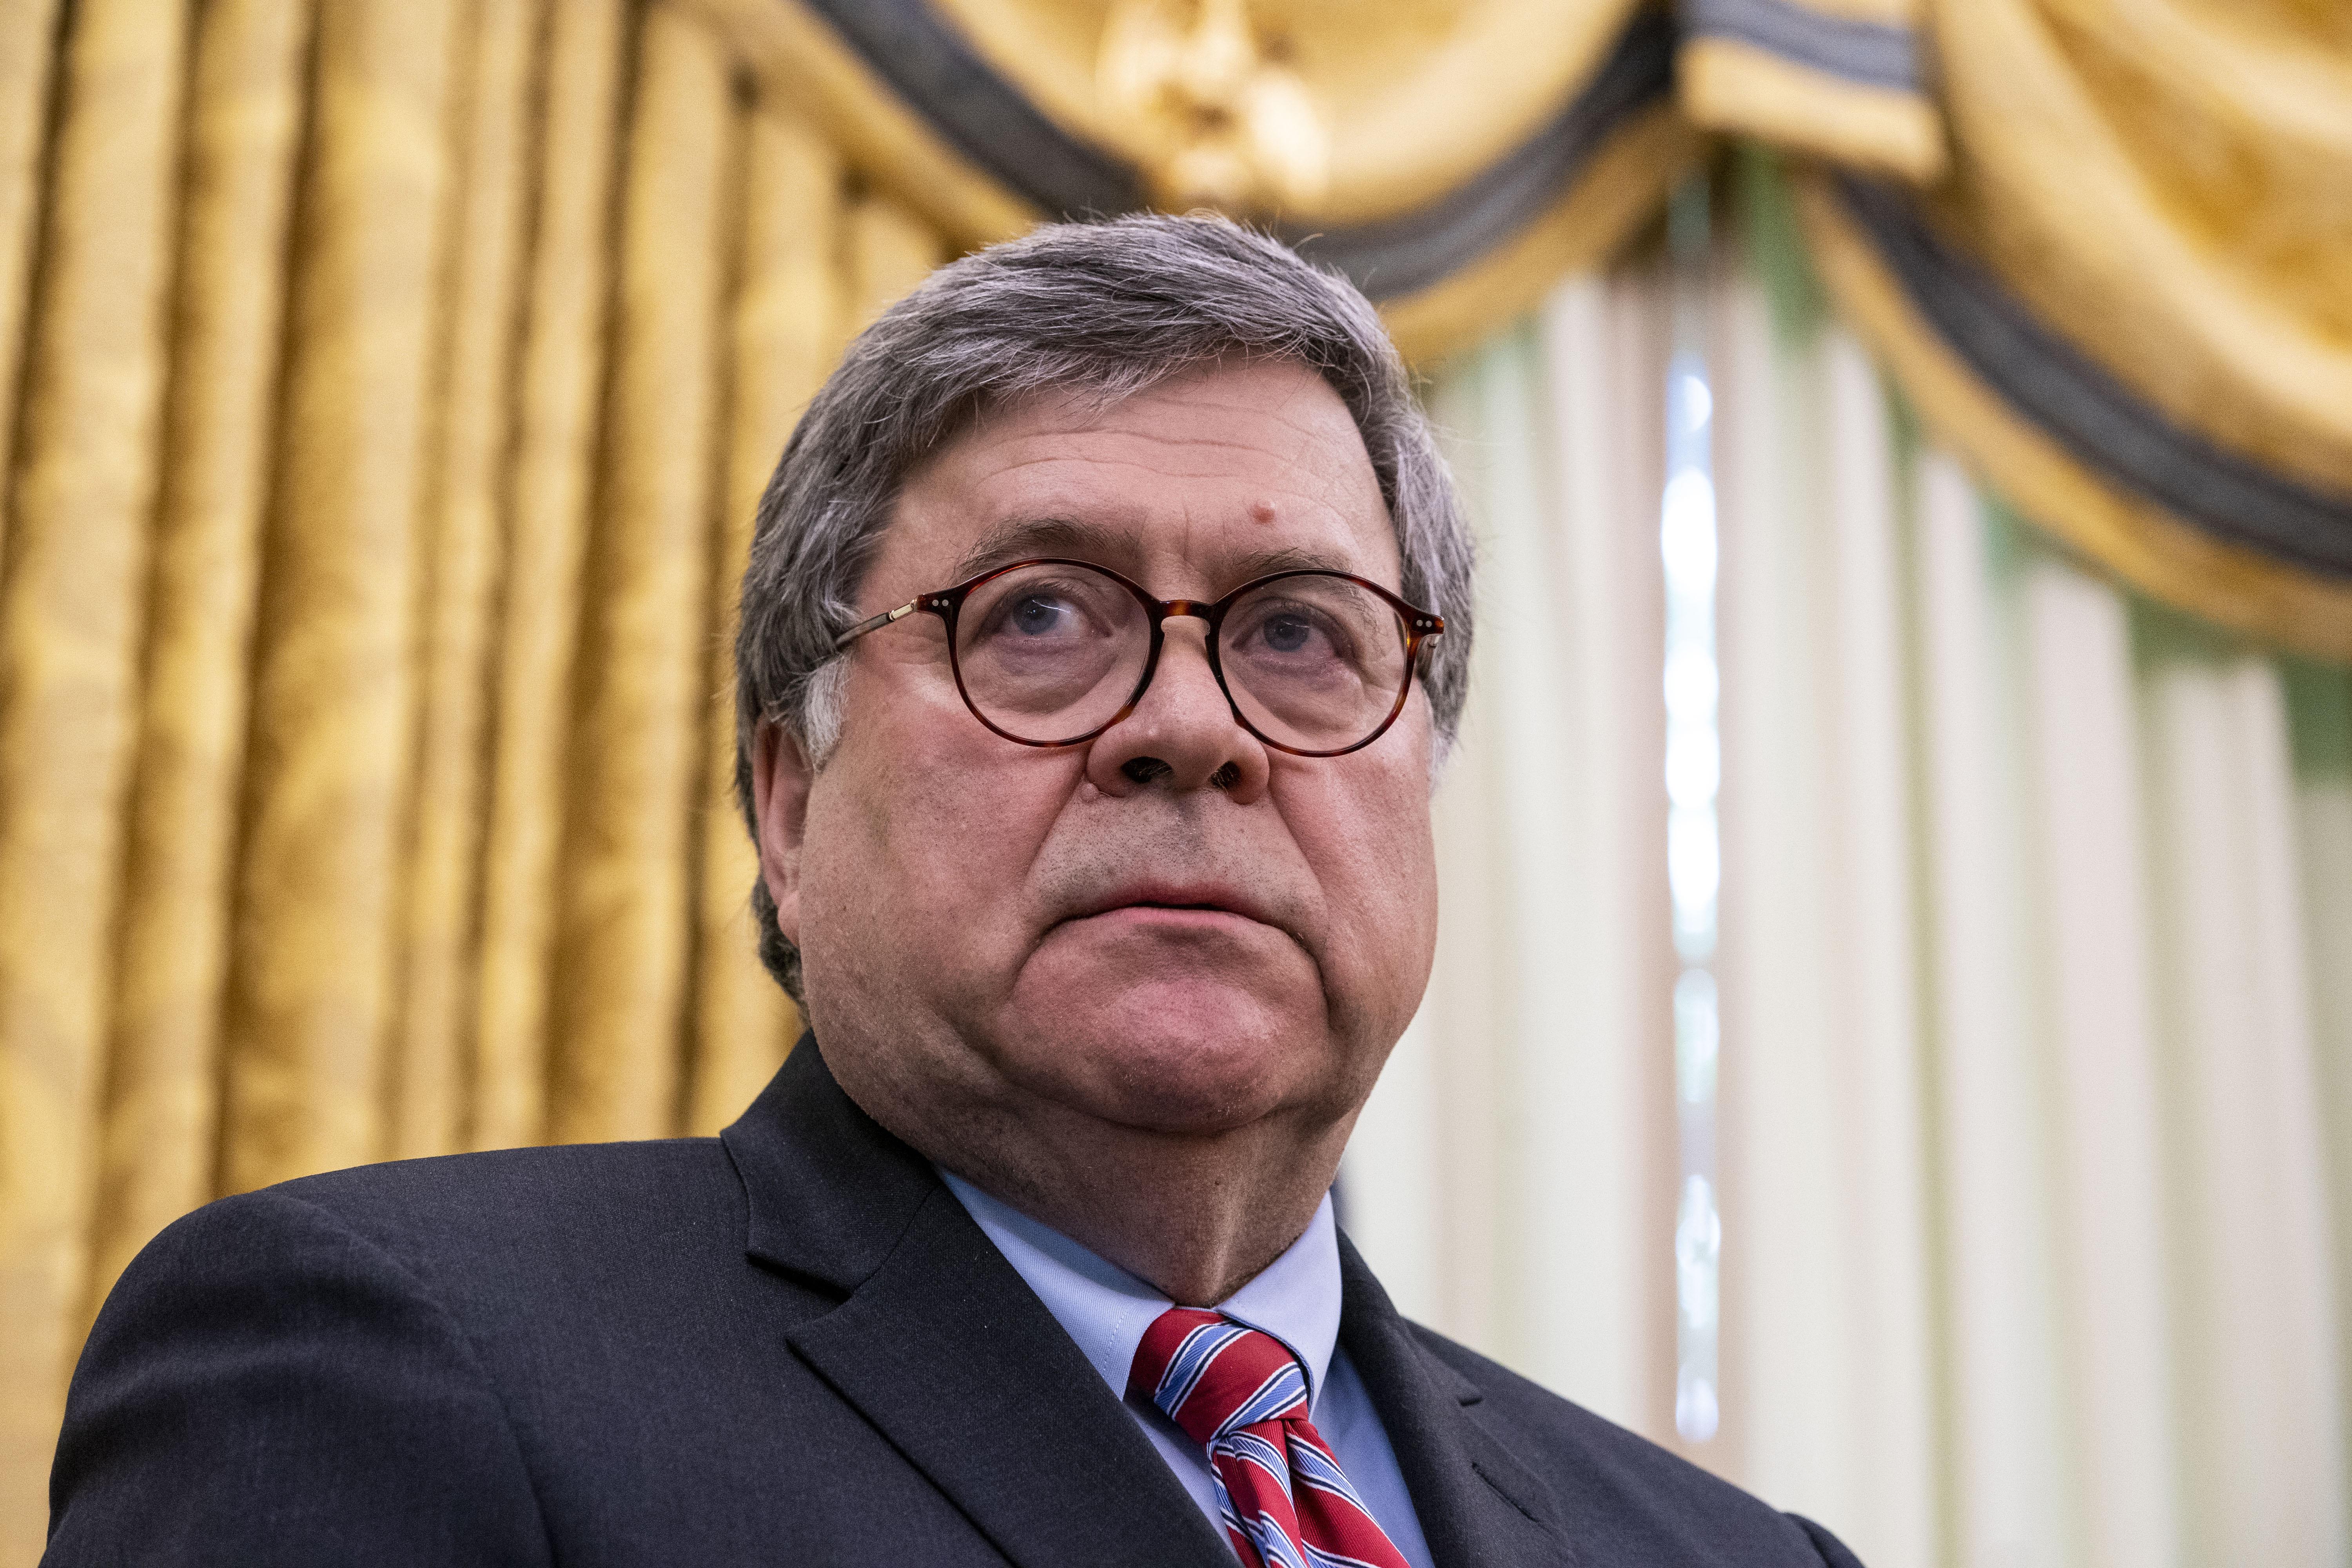 Barr listens as U.S. President Donald Trump speaks in the Oval Office.